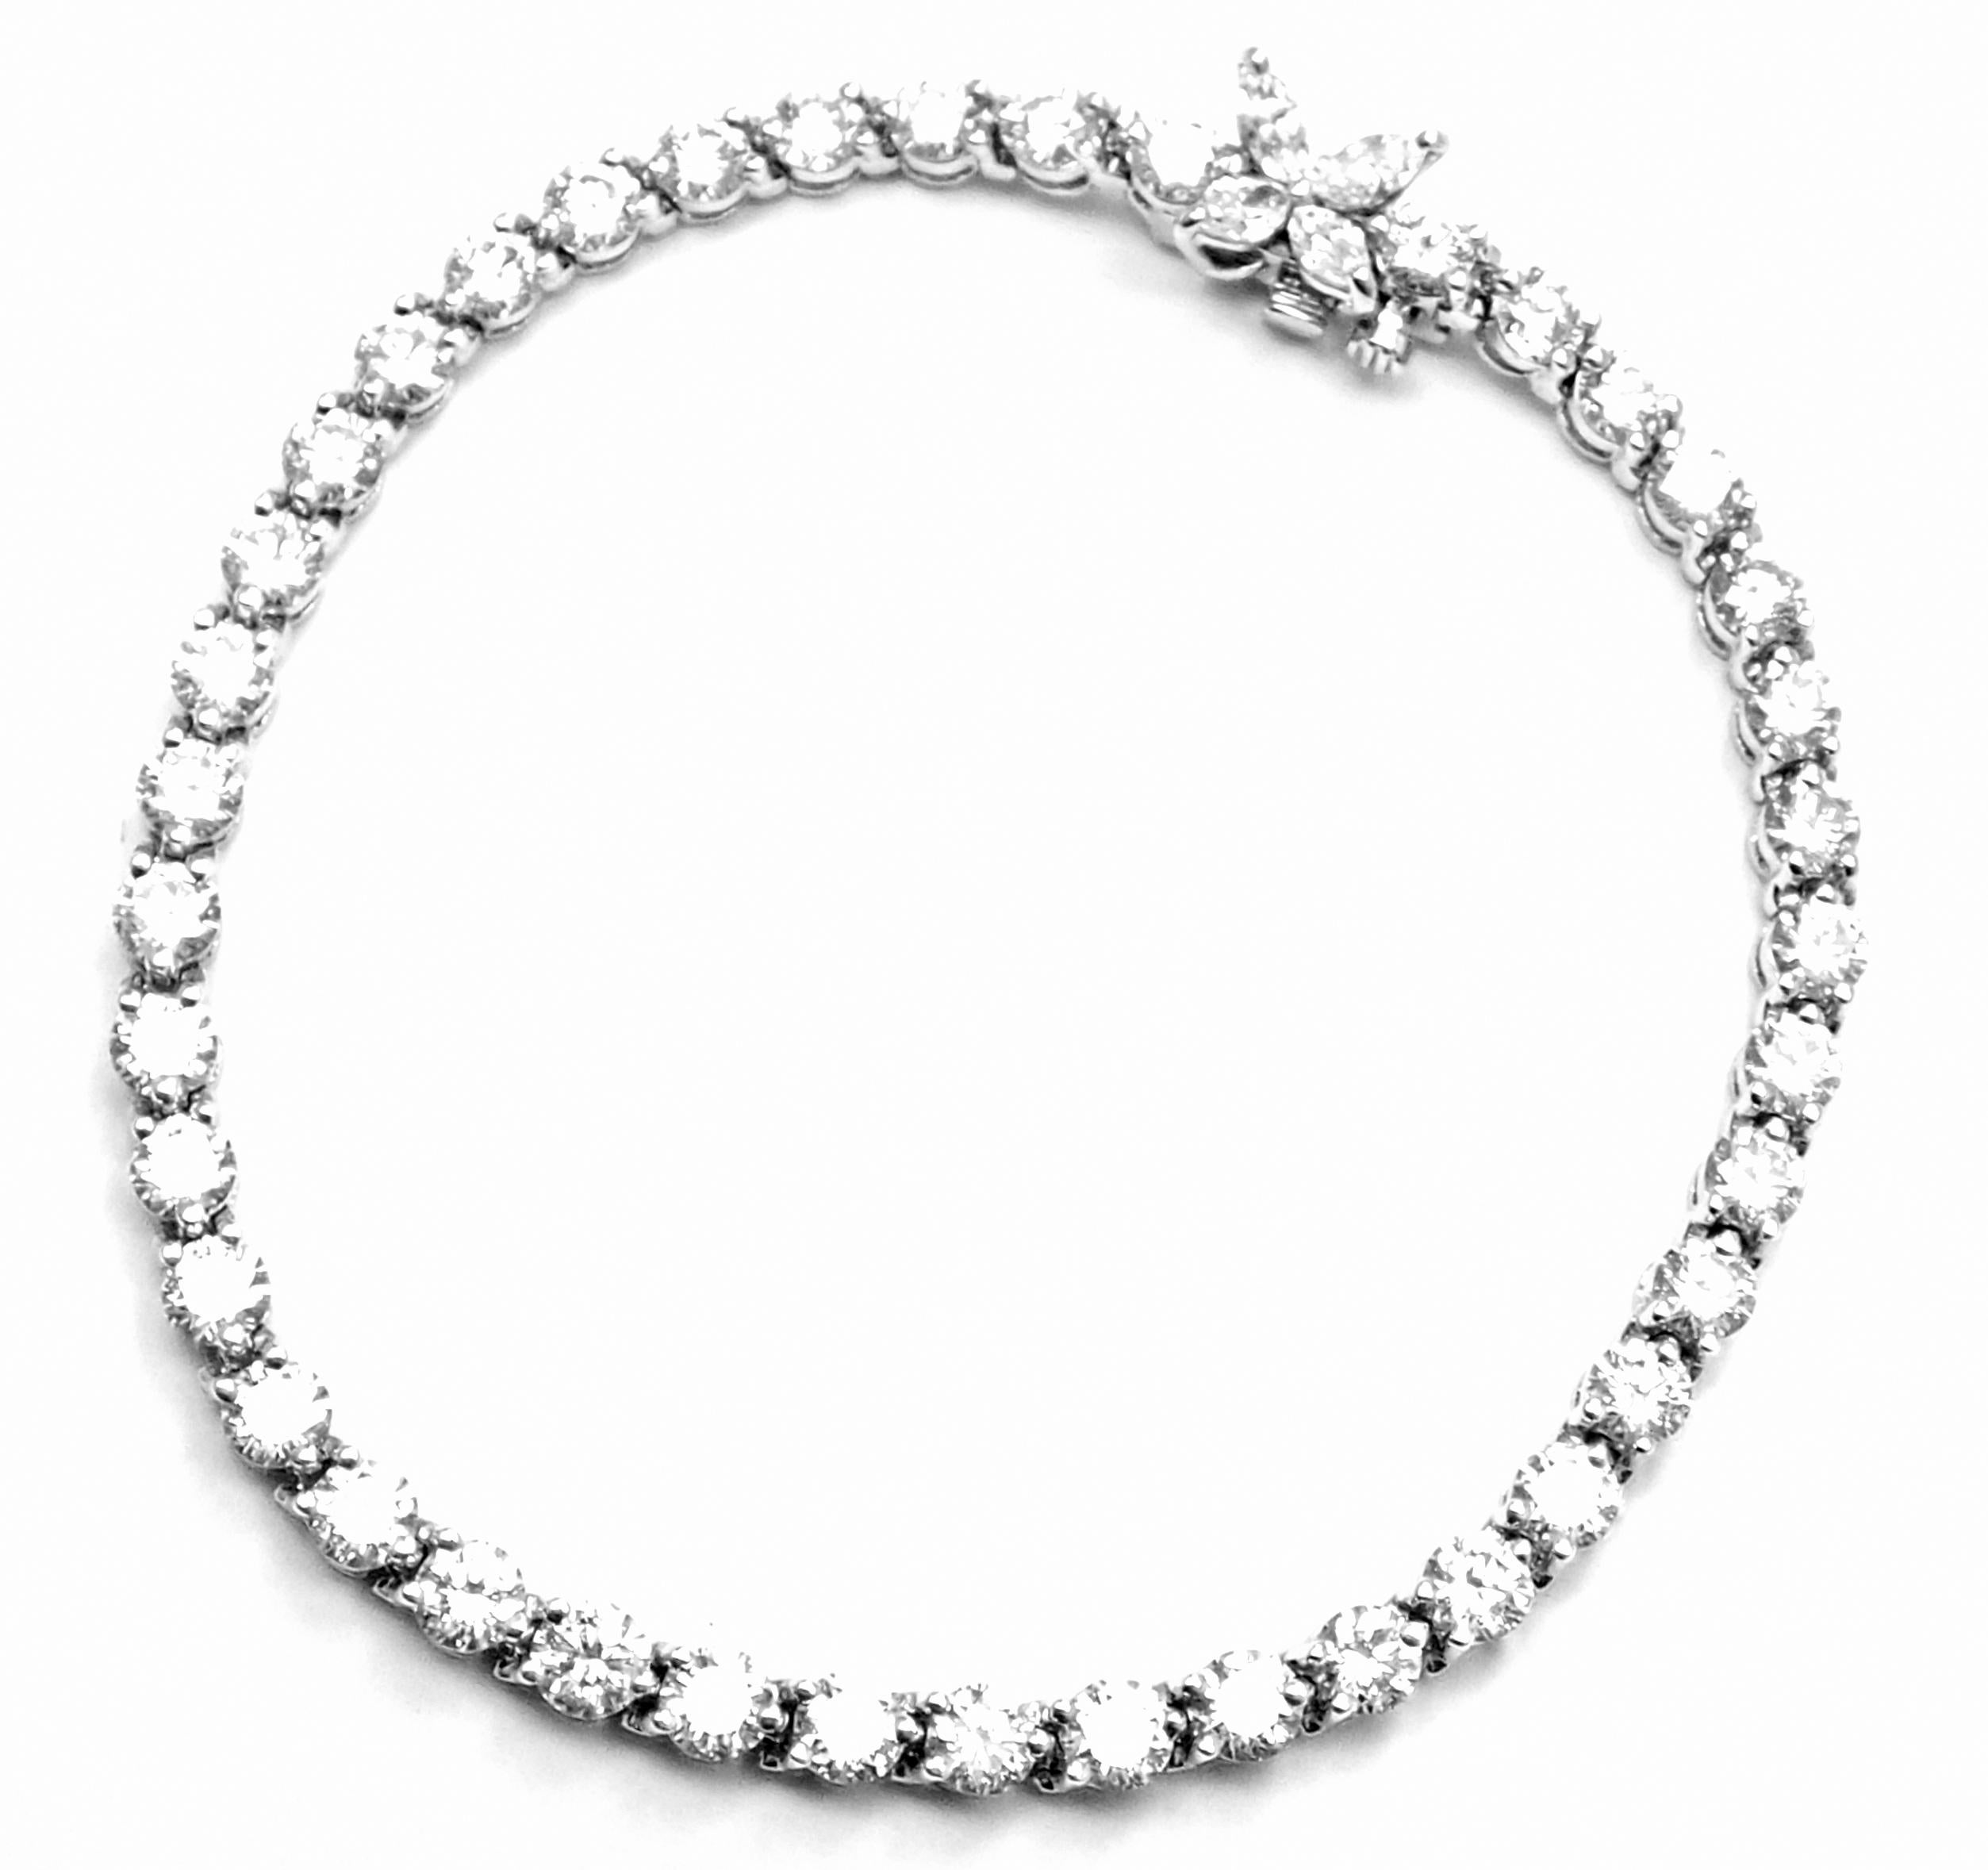 Platinum Diamond Line Tennis Bracelet by Tiffany & Co from Victoria collection.
With 40 round brilliant cut diamonds VS1 clarity, E color total weight approx. 6.22ct
4 marque cut diamonds VS1 clarity, E color total weight .31ct
Retail Price: $39,000